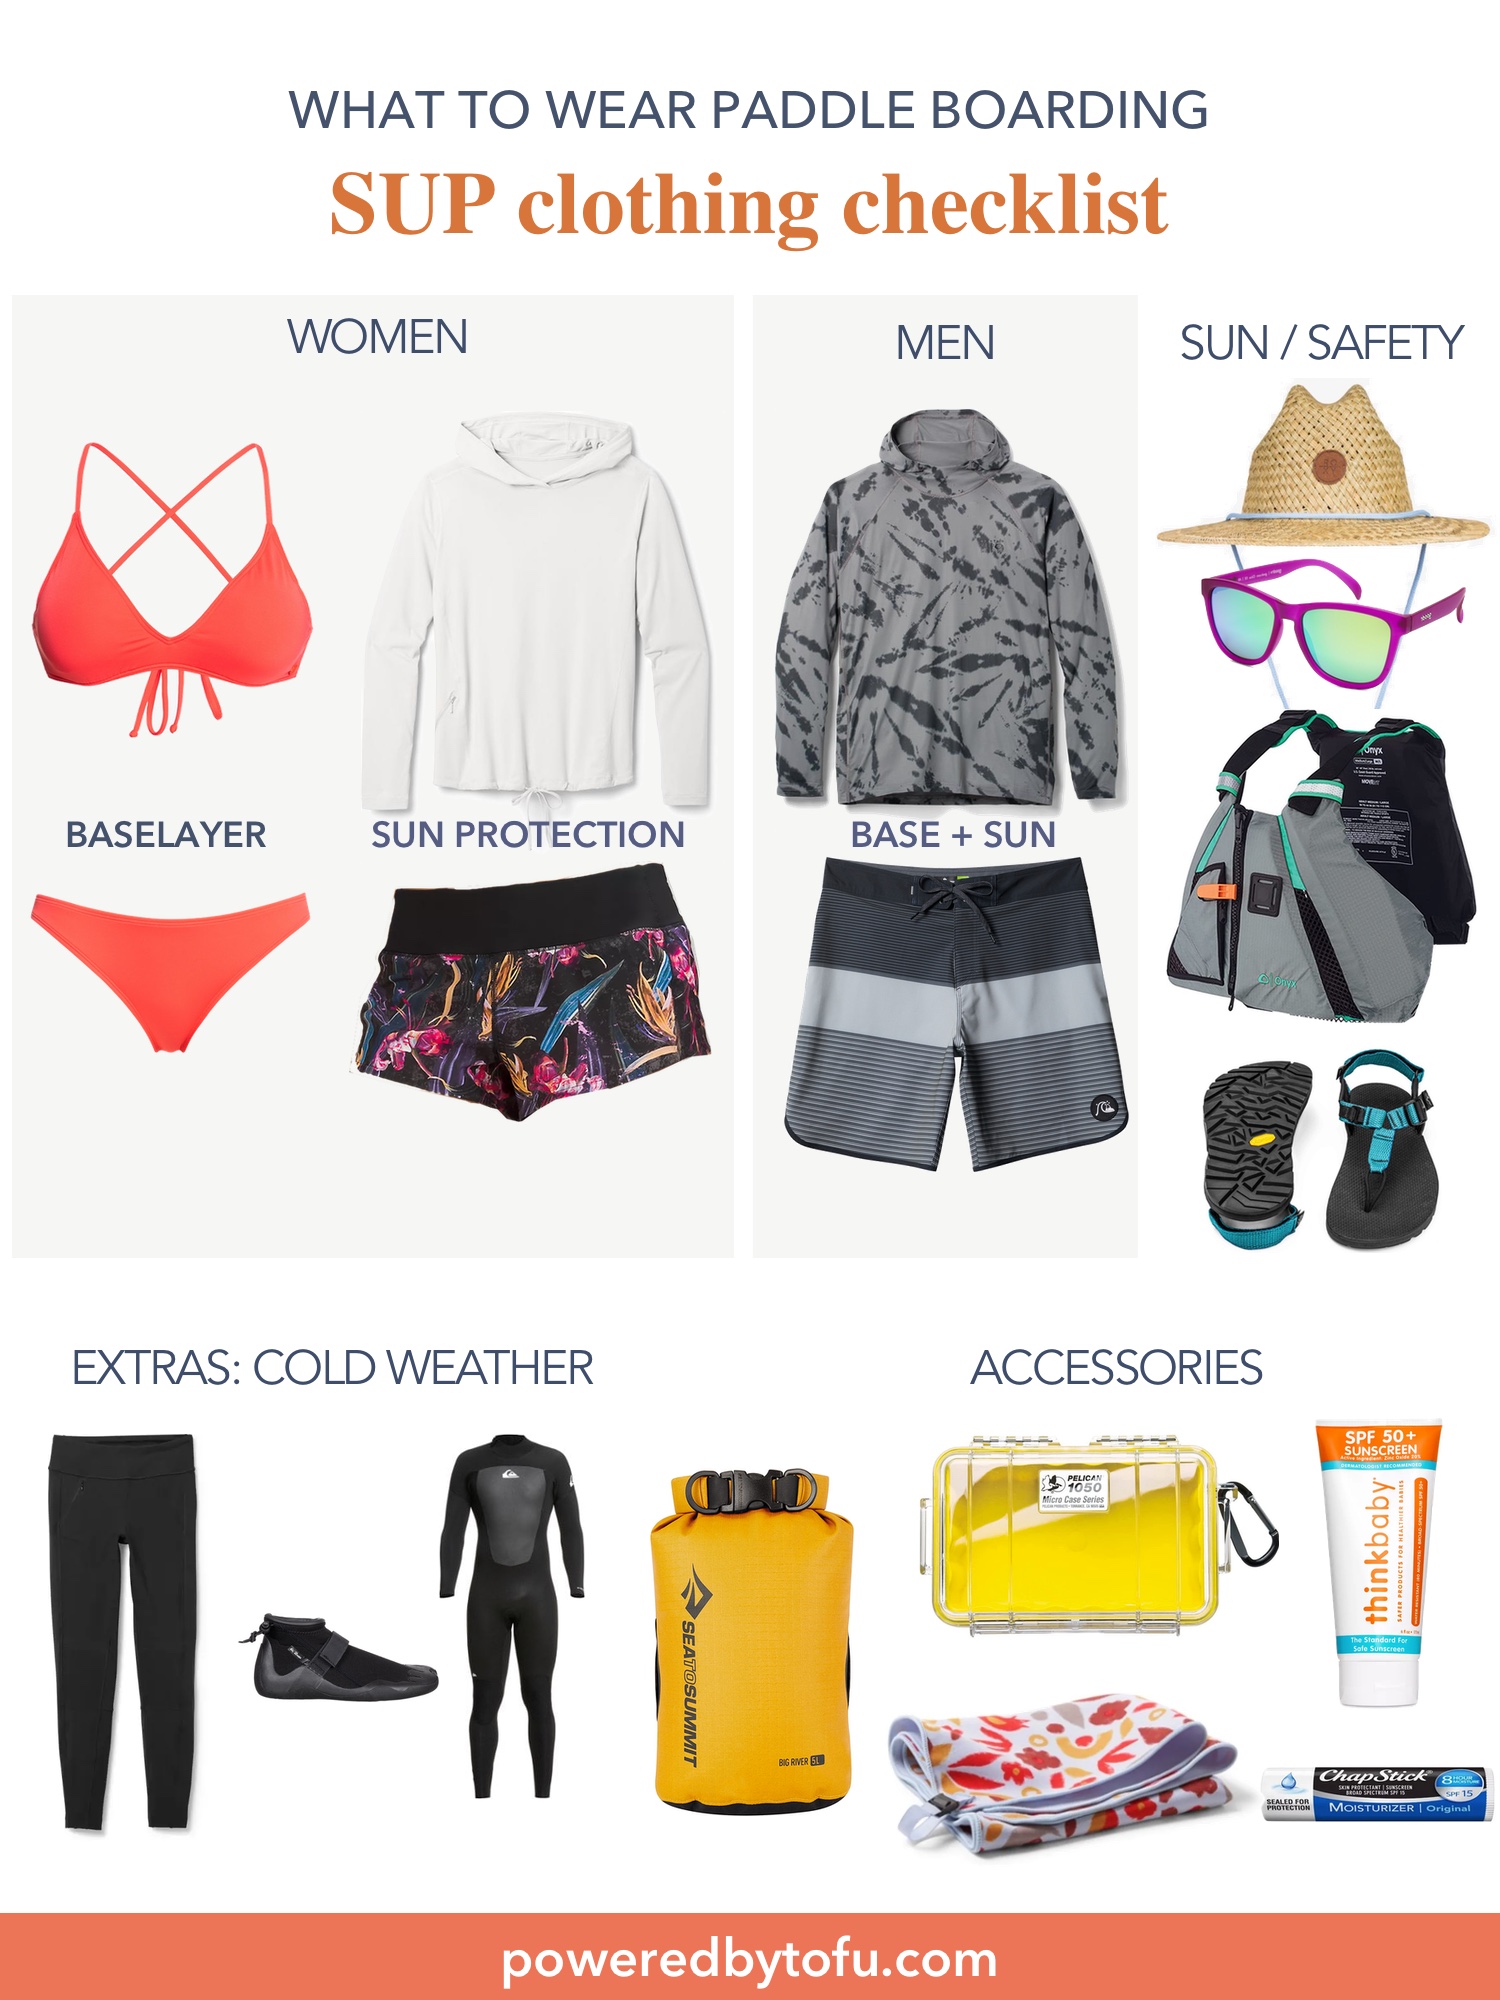 What to Wear Paddle Boarding - sup clothing ideas for women and men